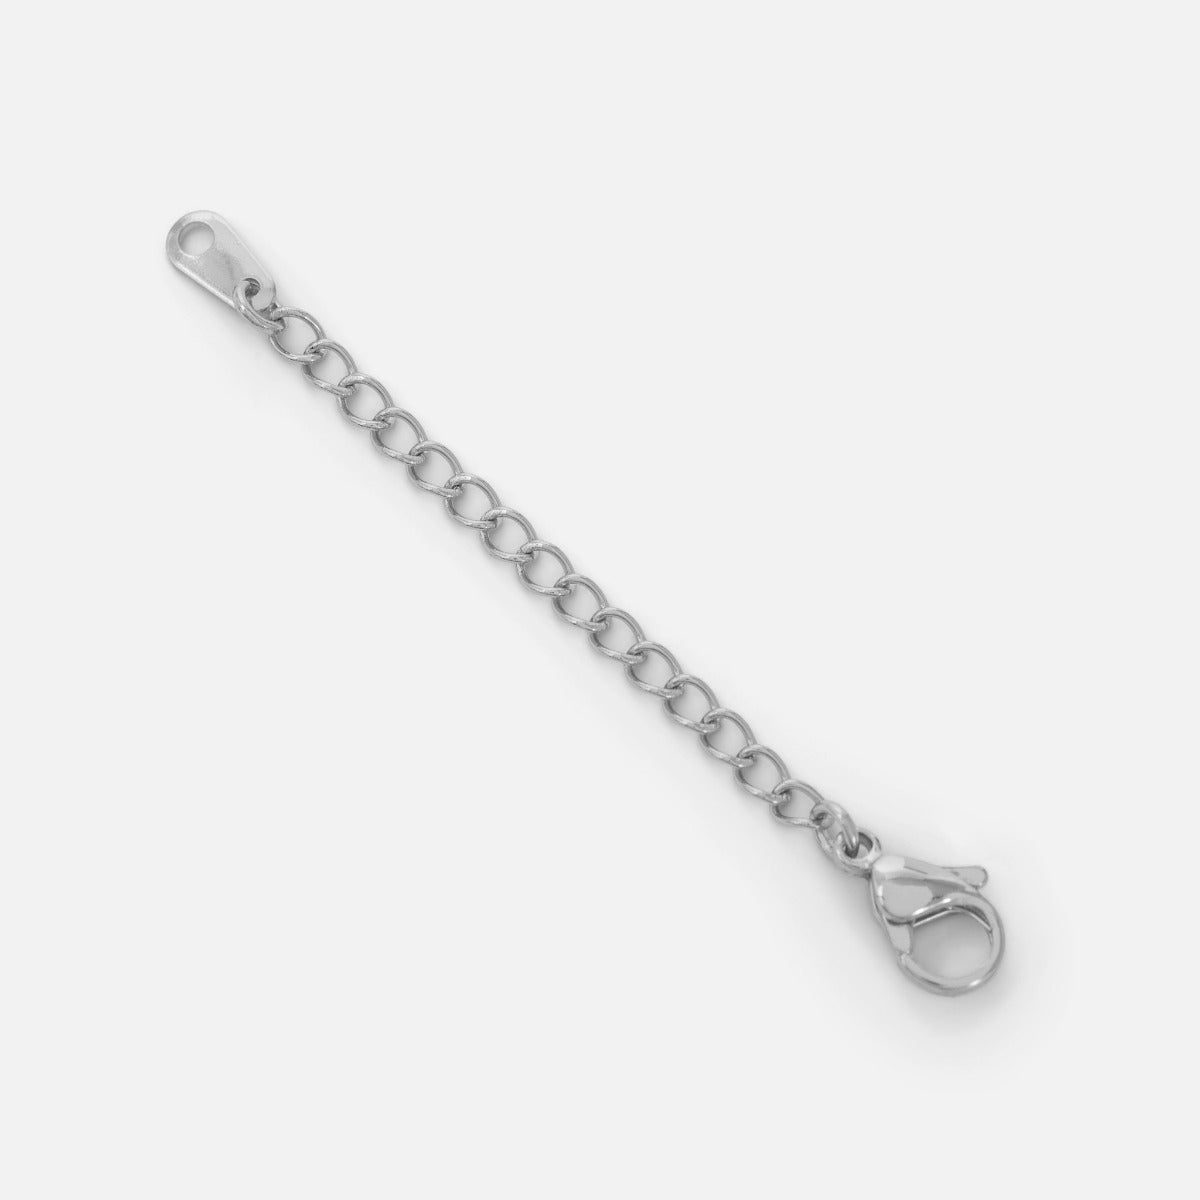 Stainless steel silver necklace extender 